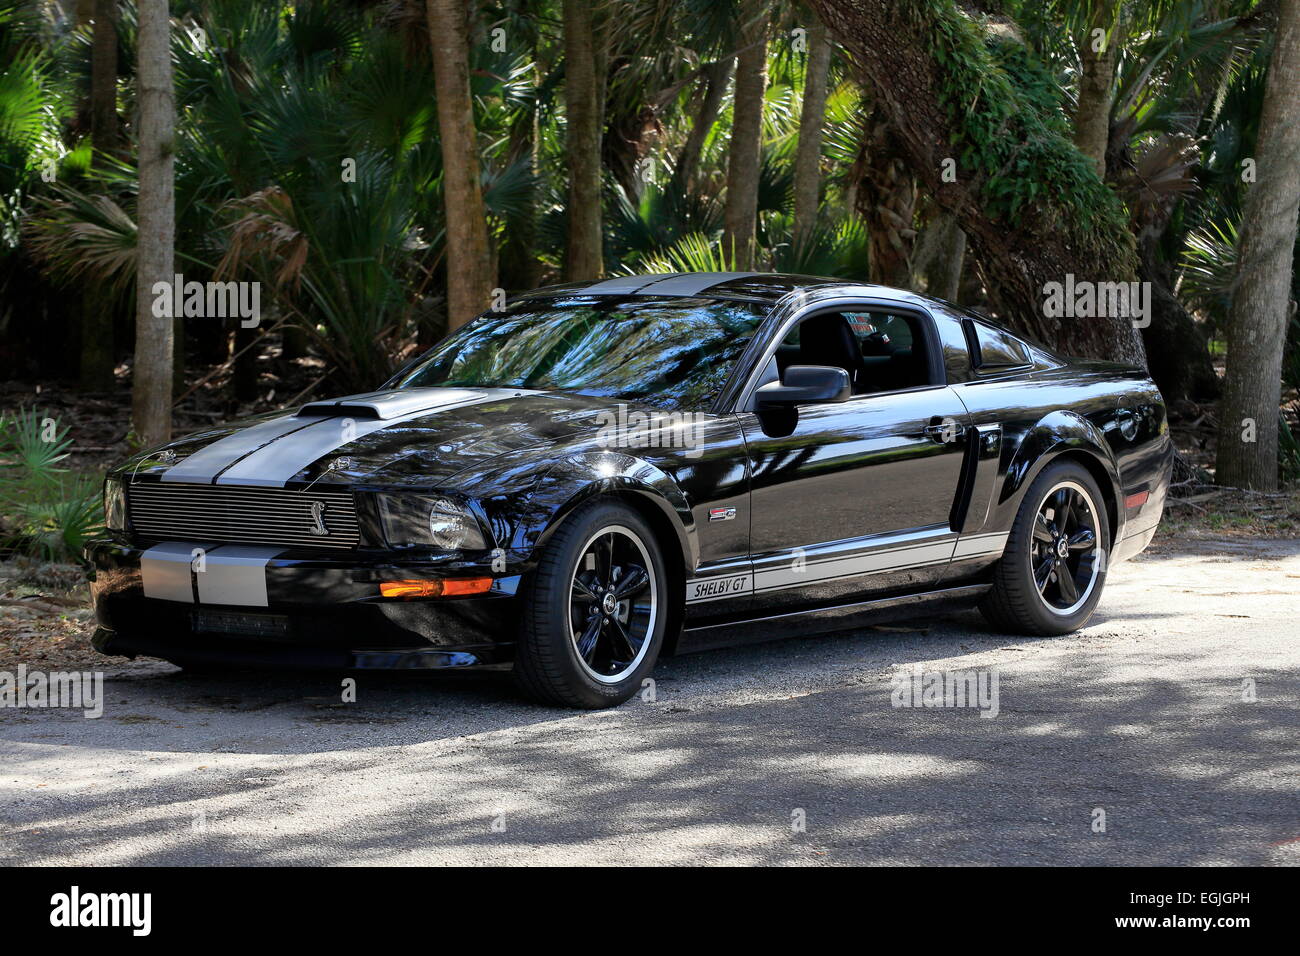 Ein 2007 Modell Shelby GT Ford Mustang Automobil Stockfoto